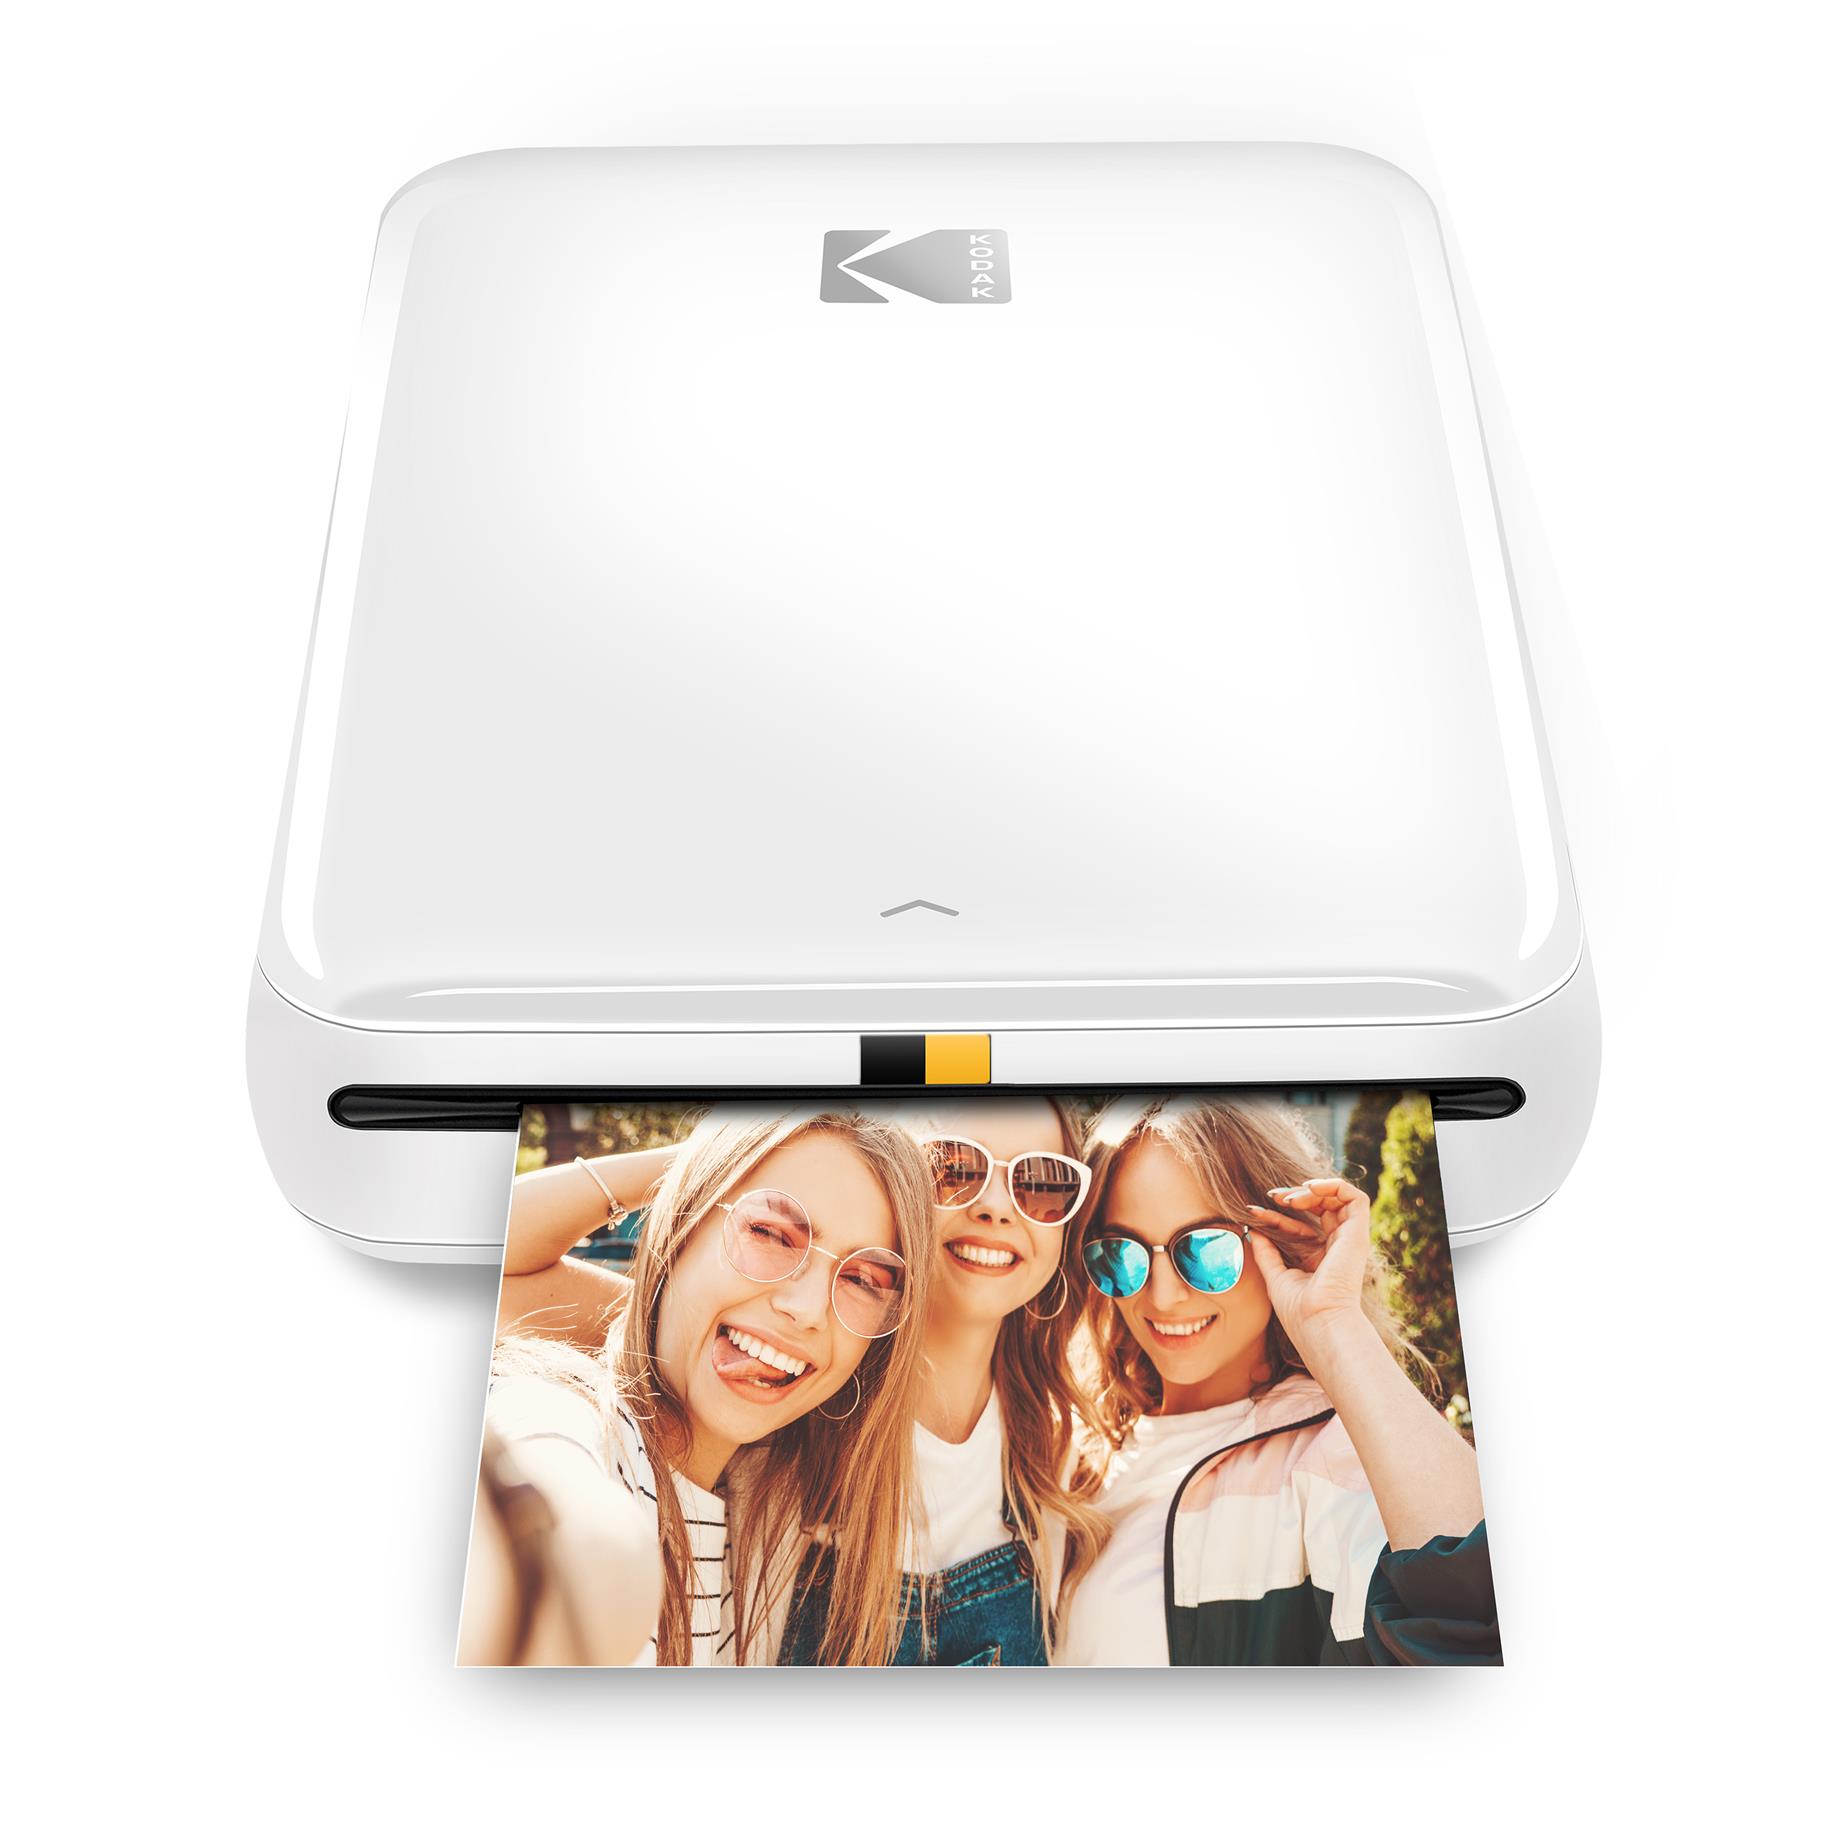 Kodak Step Wireless Mobile Photo Printer (White) Compatible w/iOS & Android, NFC & Bluetooth Devices - image 1 of 5